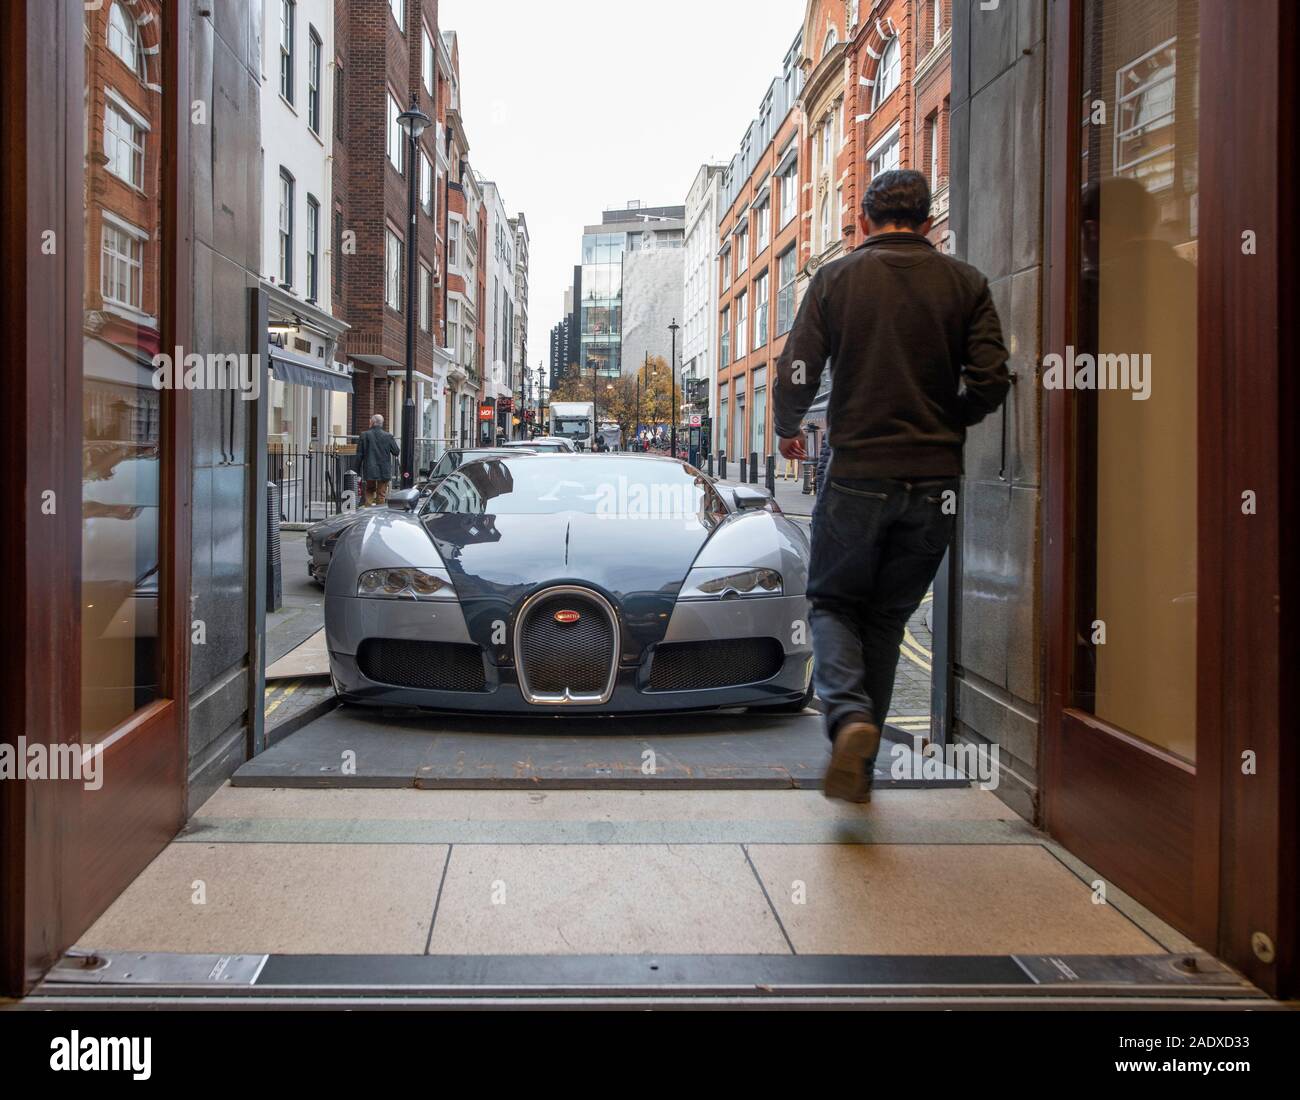 Bonhams, London, UK. 5th December 2019. Bonhams Bond Street Fine Collectors’ Motor Car sale preview includes cars owned by Jay Kay, Barbara Hutton, HRH The Prince of Wales, Jools Holland. The sale takes place on 7th December. Image: Tight fit for The first UK supplied example 2006 Bugatti Veyron EB 16.4 Coupé. Estimate: £850,000-1,250,000. Credit: Malcolm Park/Alamy Live News. Stock Photo